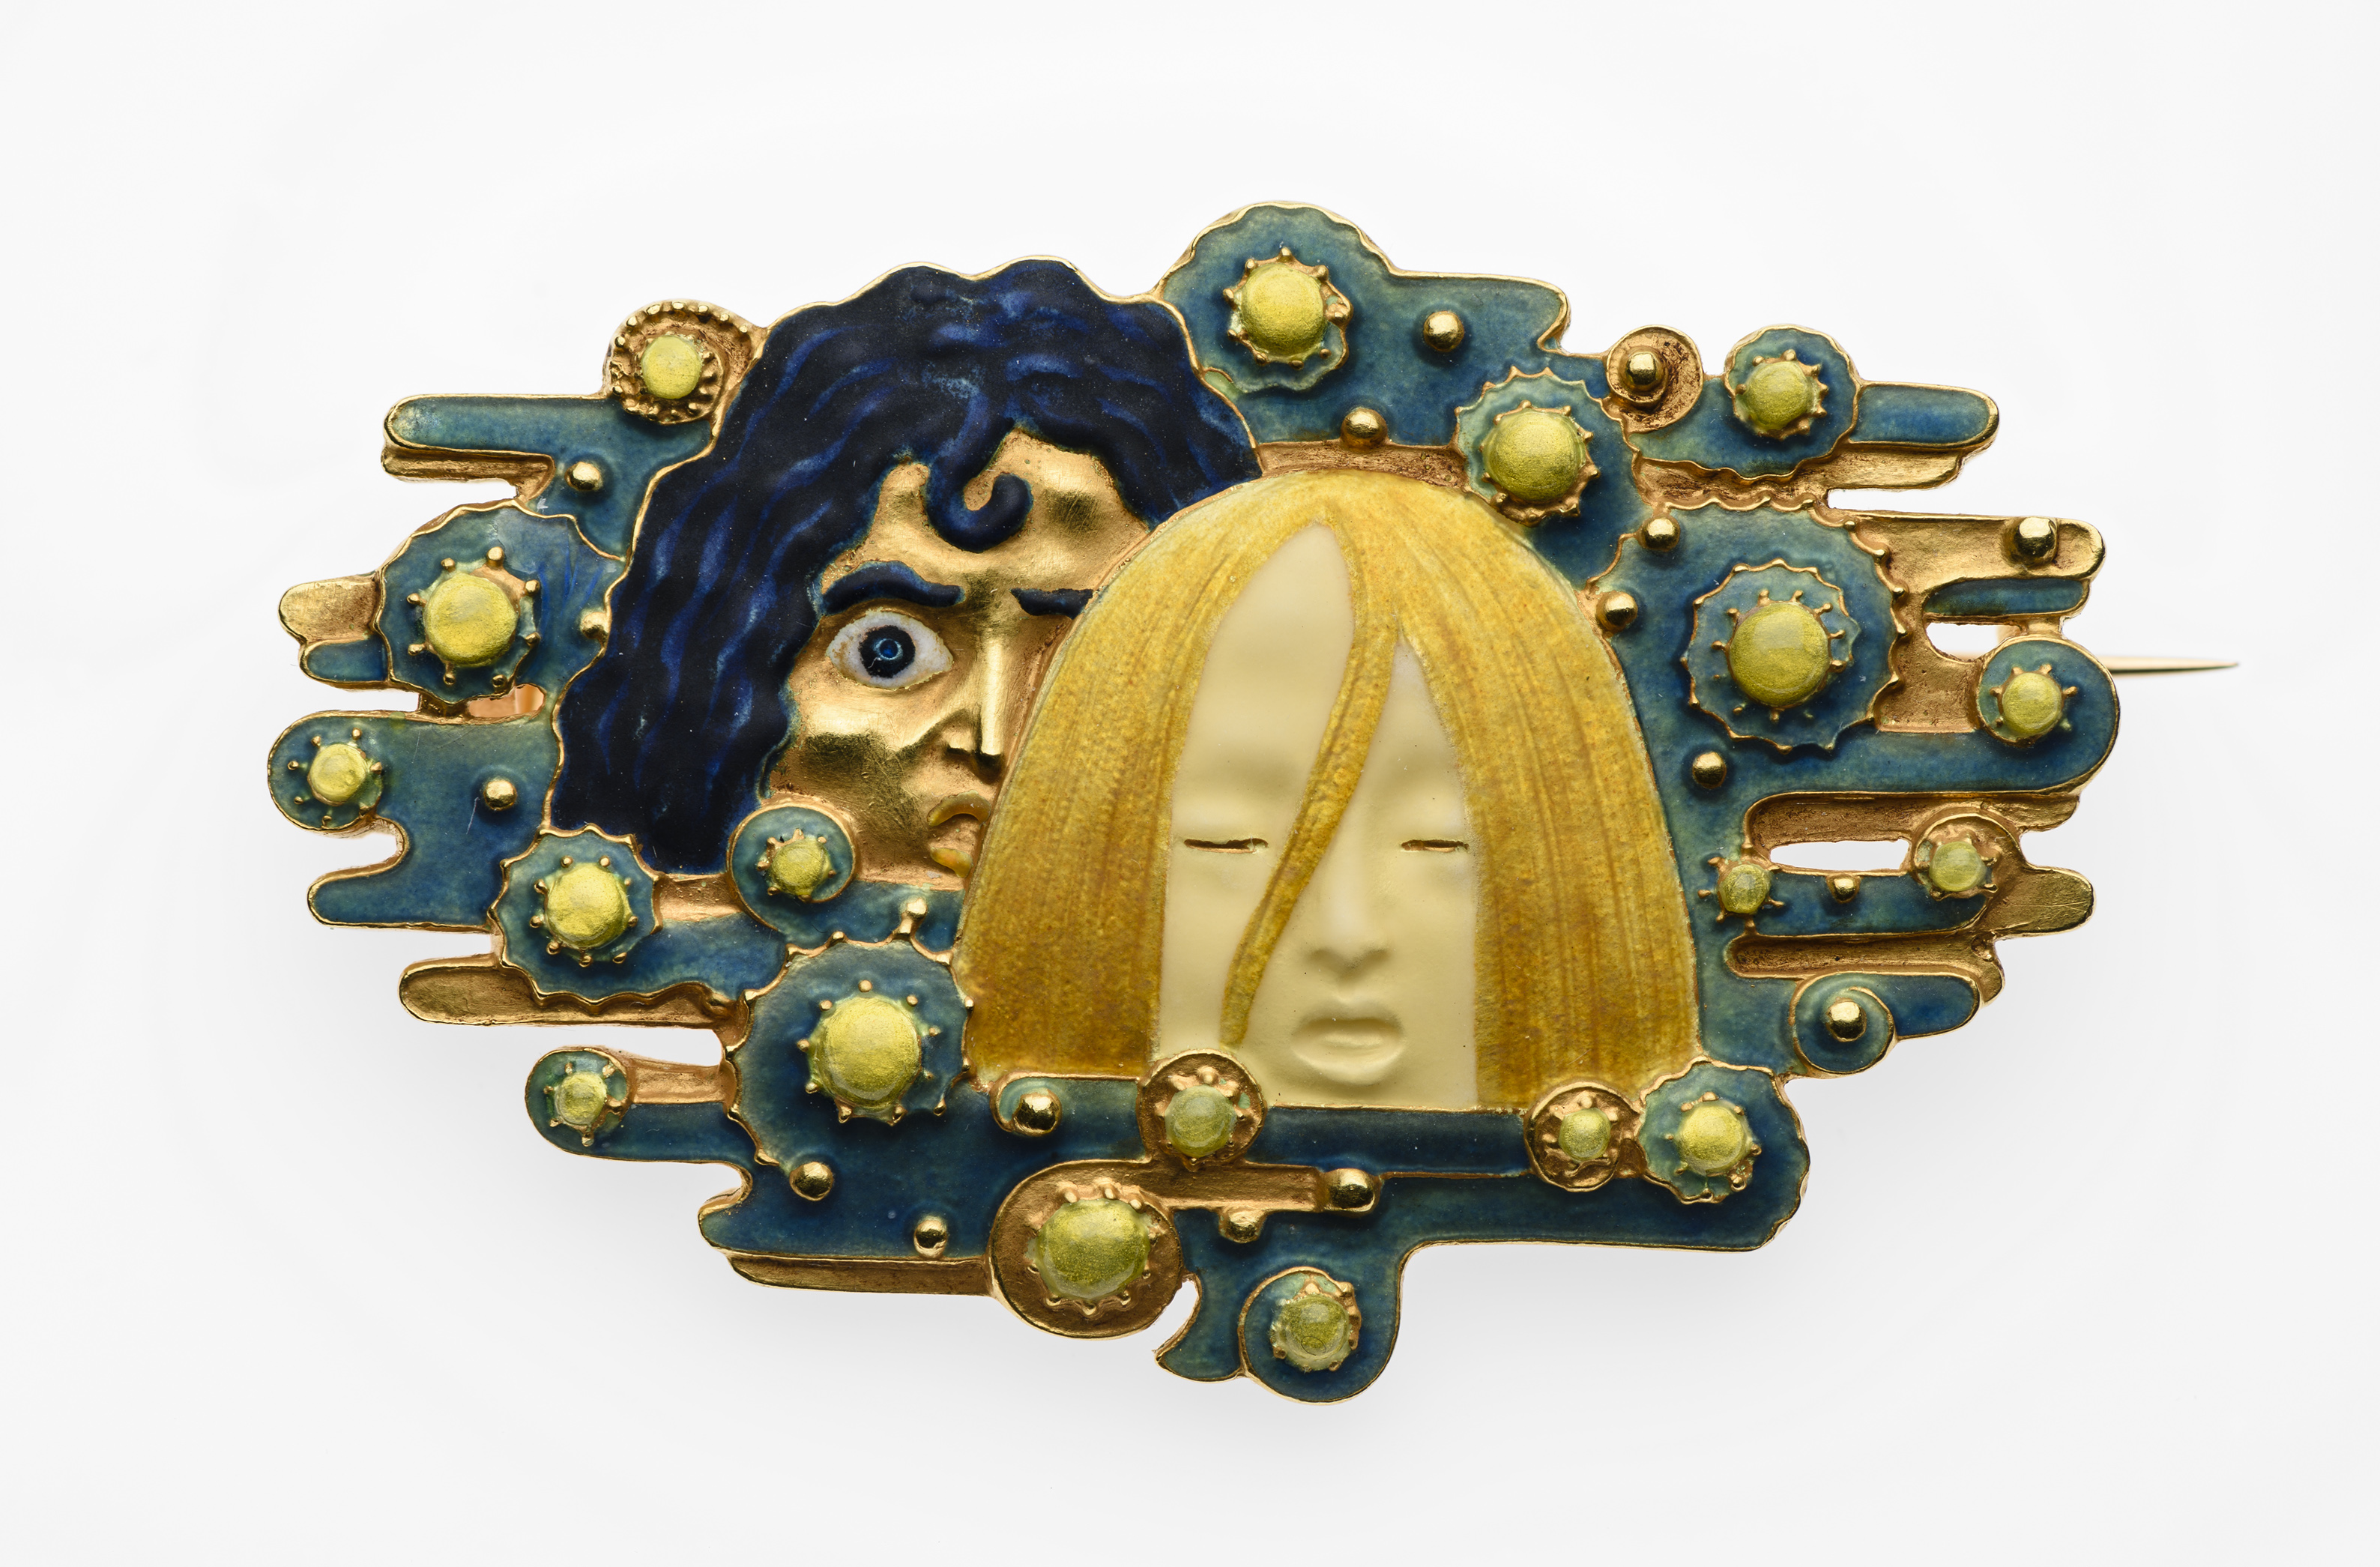 Henri Vever’s haunting gold and enamel brooch Apparitions, originally made for the 1900 Exposition Universelle in Paris, will appear in Beyond Brilliance: Jewelry Highlights from the Collection at the Museum of Fine Arts, Boston. 1.5 x 2.5 in. Photo © Museum of Fine Arts, Boston.